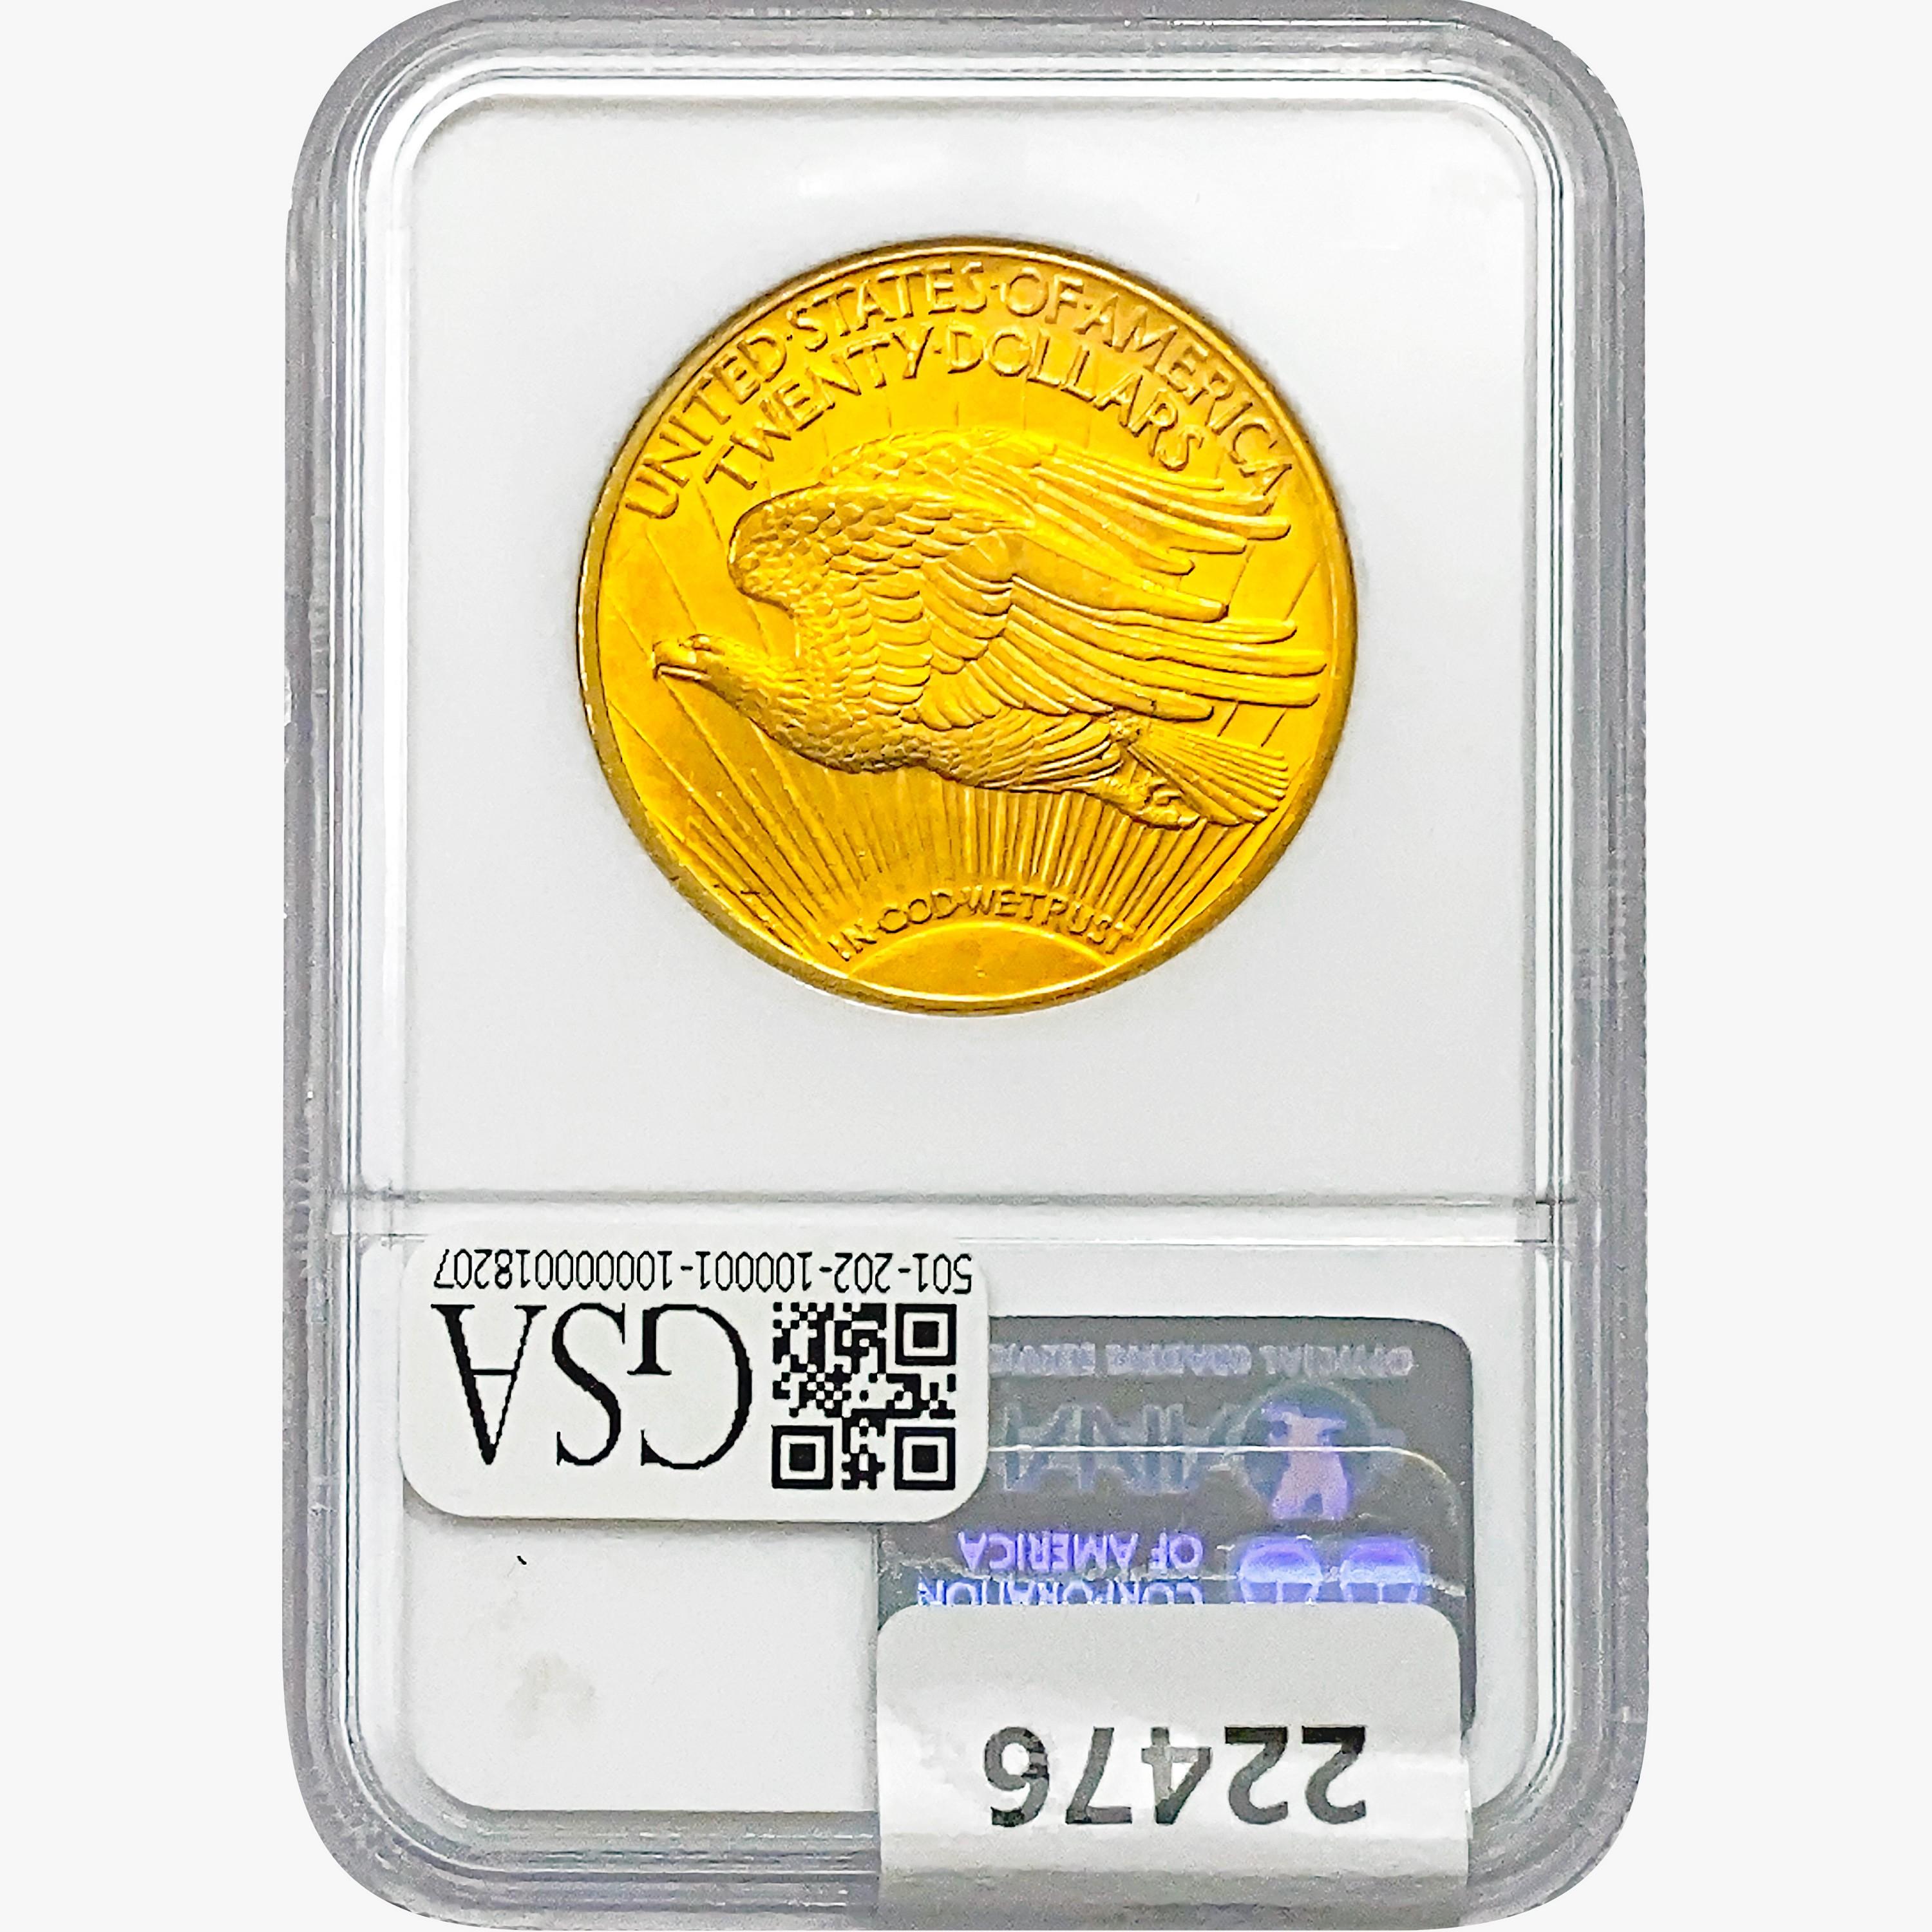 1924 $20 Gold Double Eagle NGC MS65